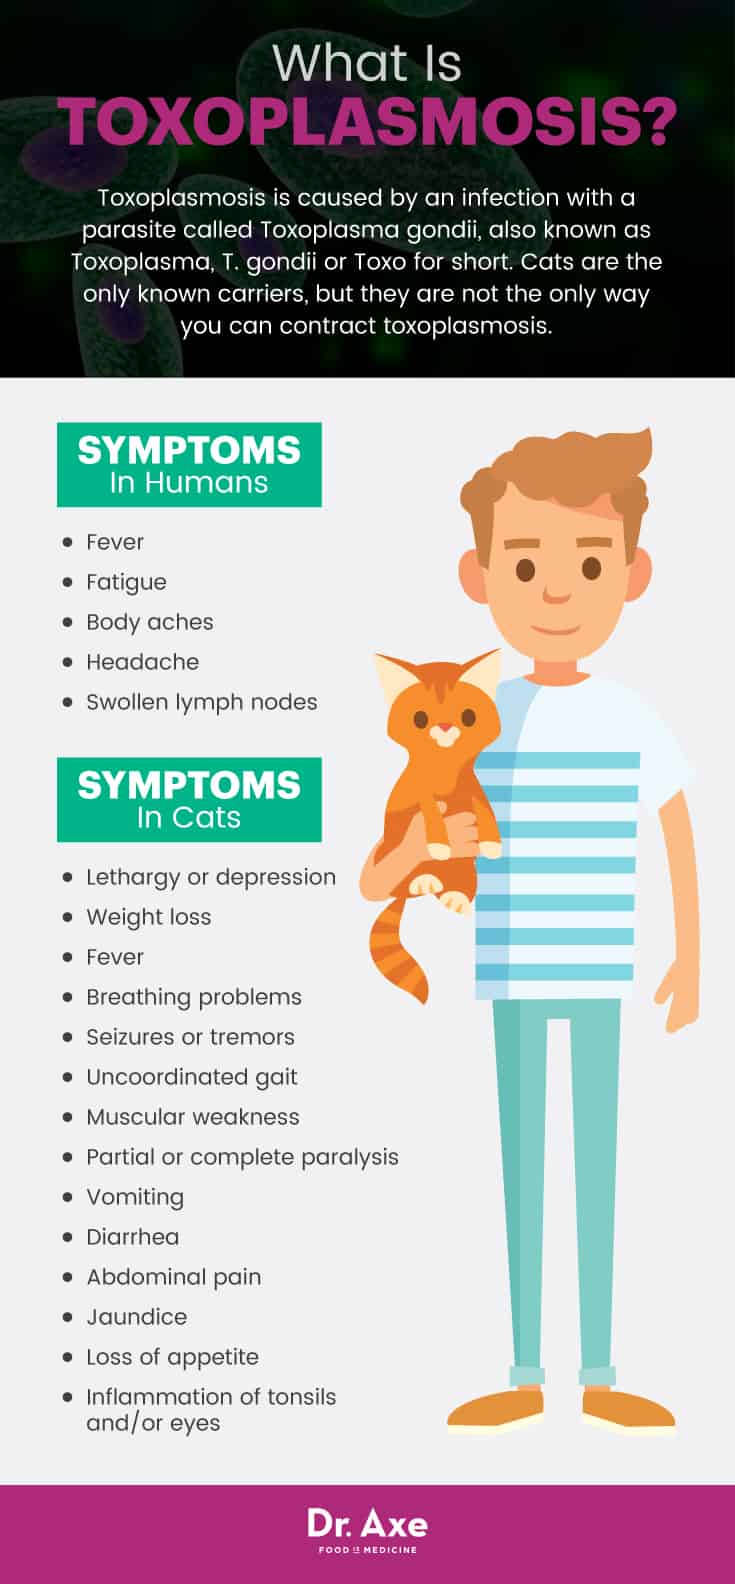 Toxoplasmosis symptoms in humans and cats - Dr. Axe